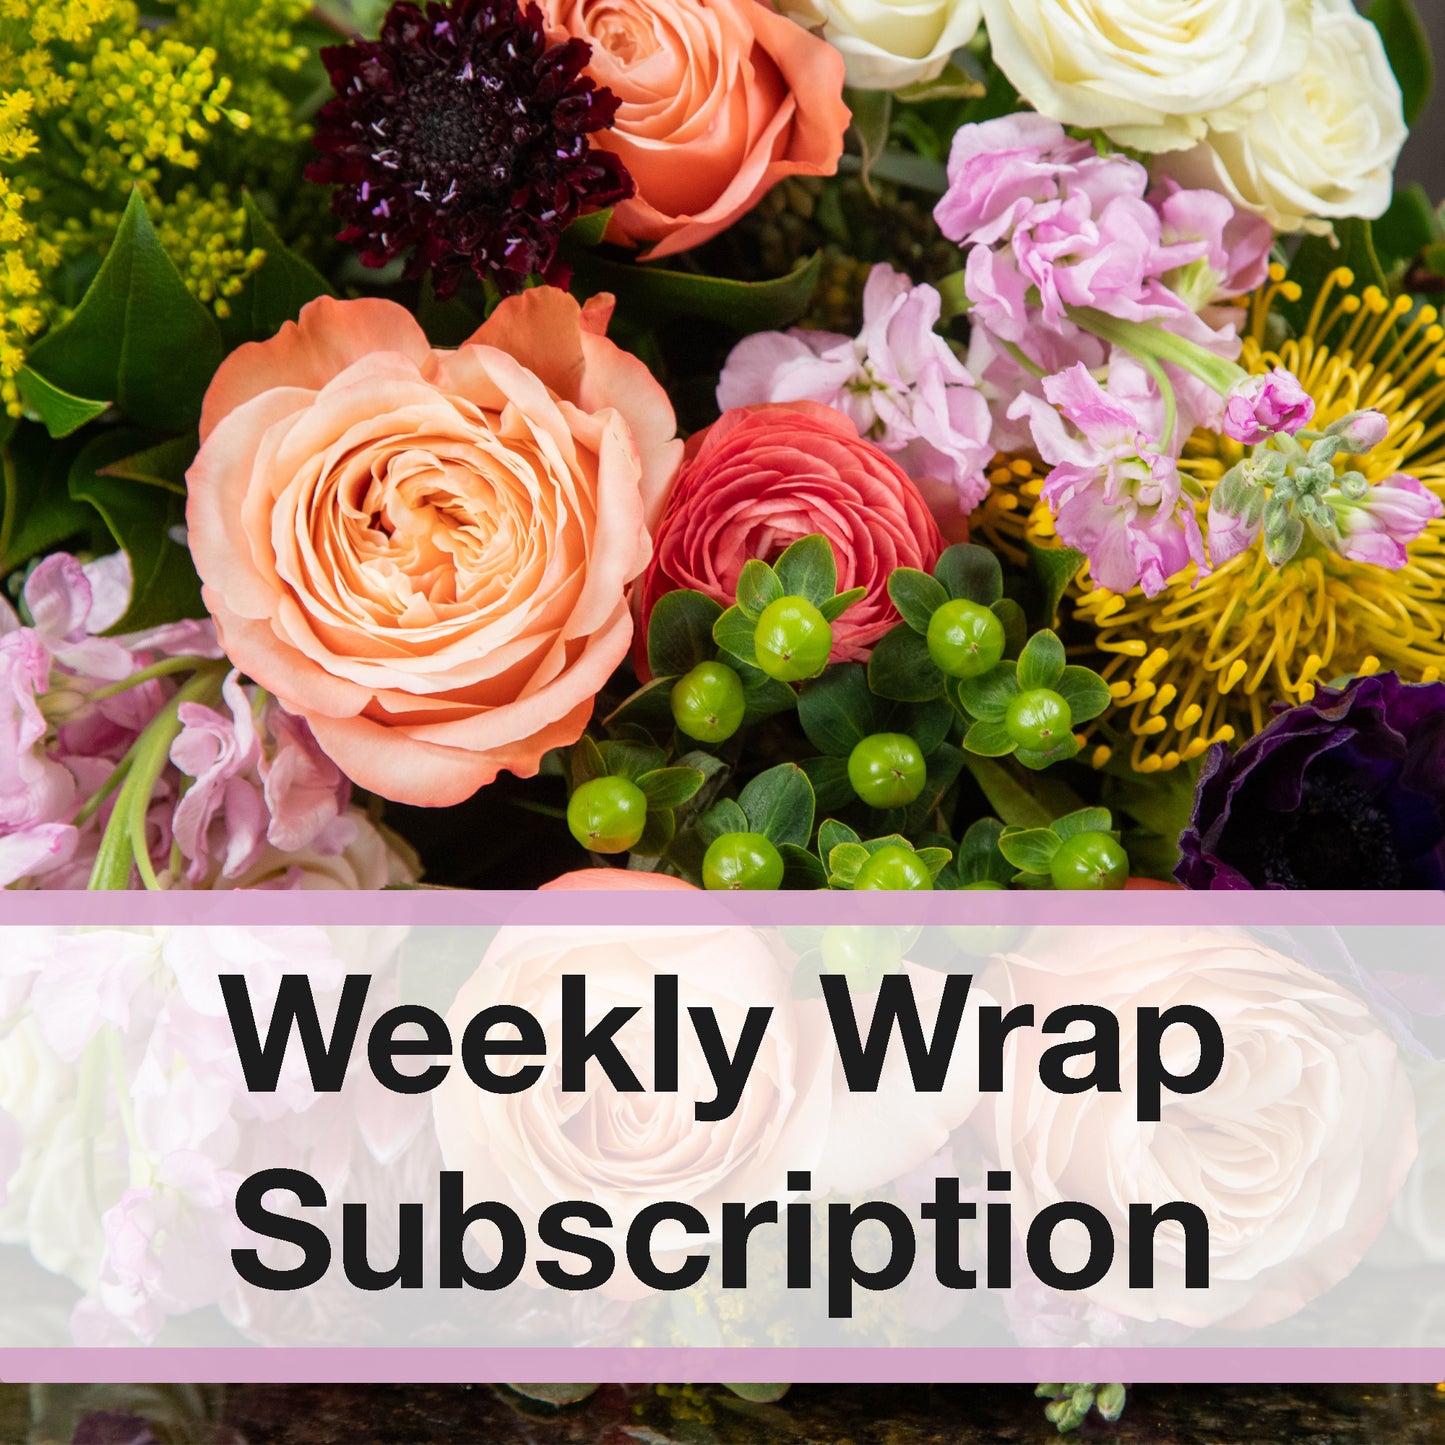 "weekly wrap subscription" written below a variety of colorful flowers